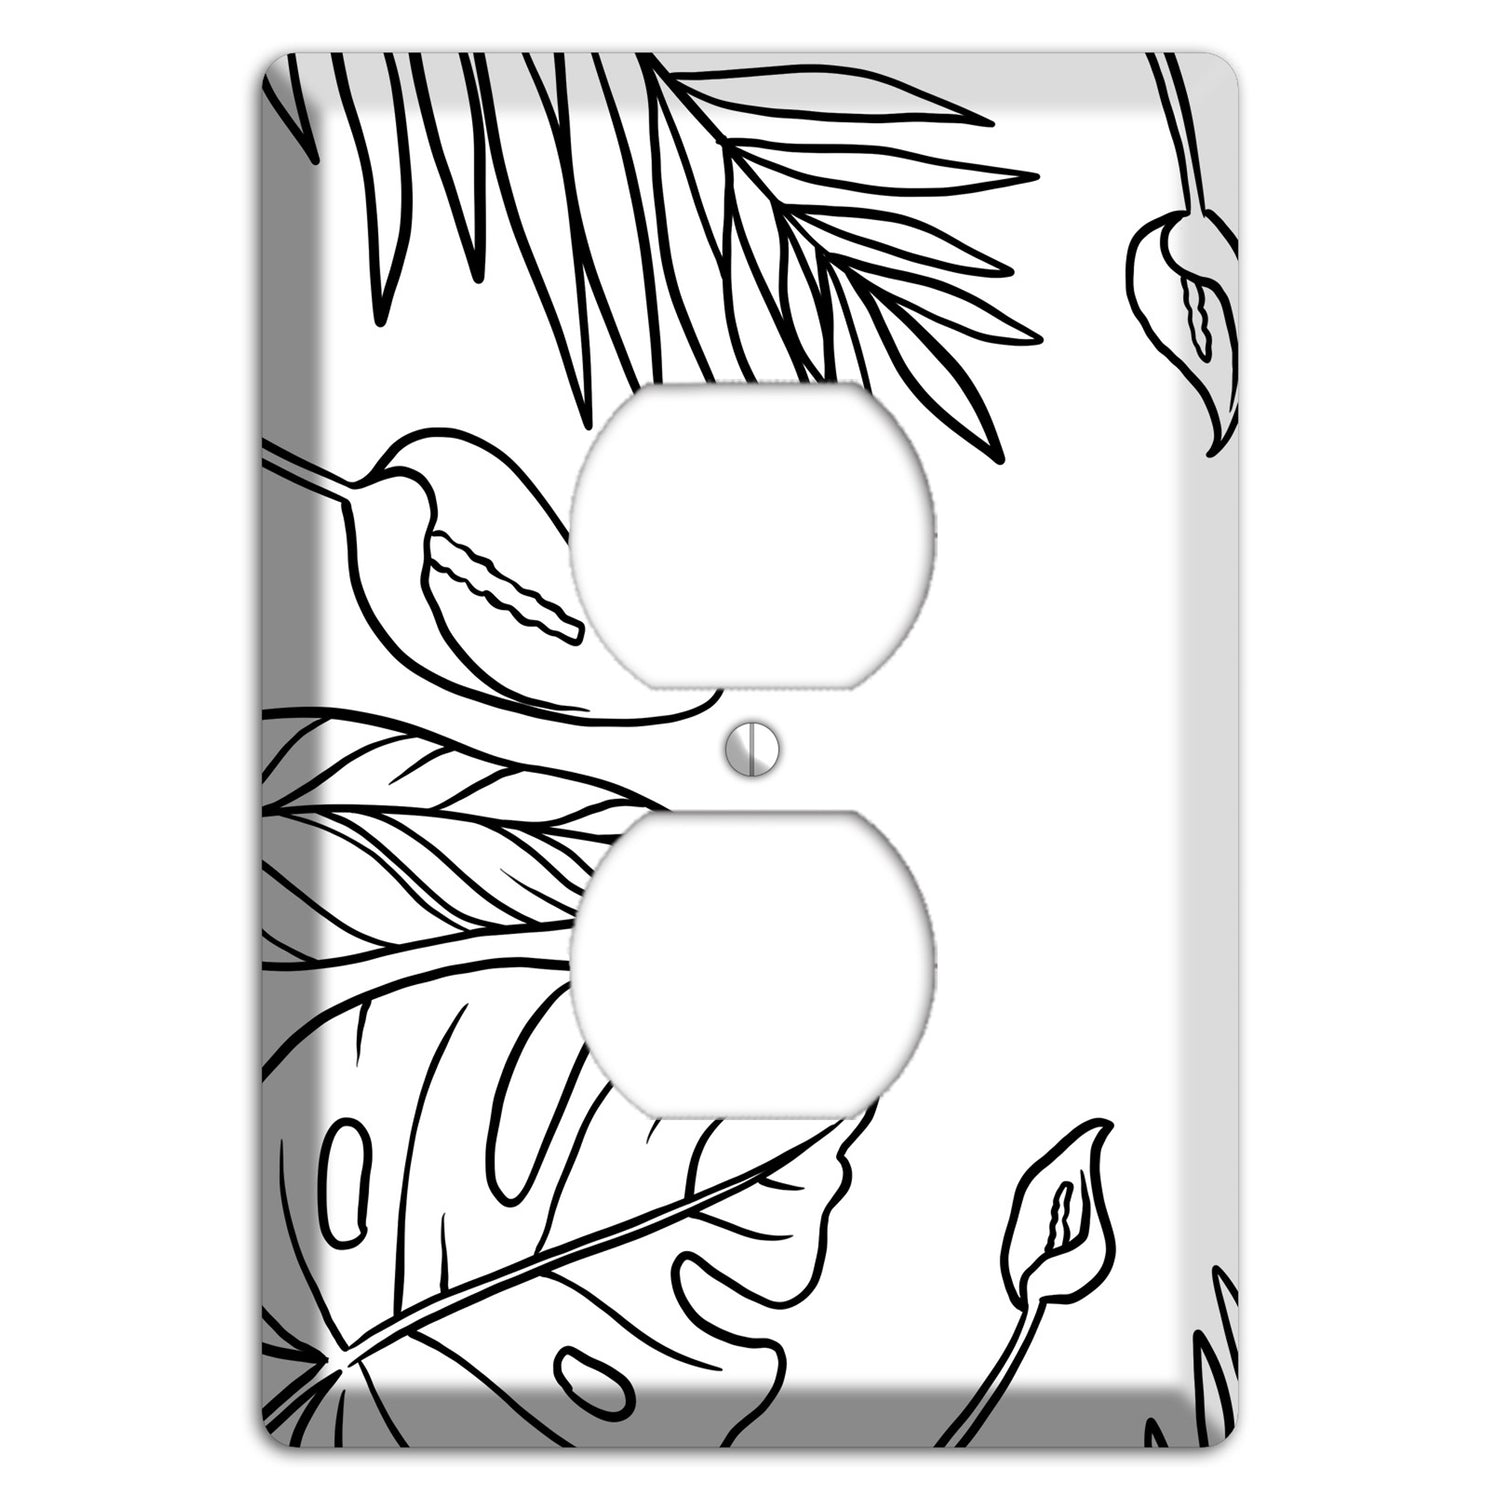 Hand-Drawn Leaves 1 Duplex Outlet Wallplate